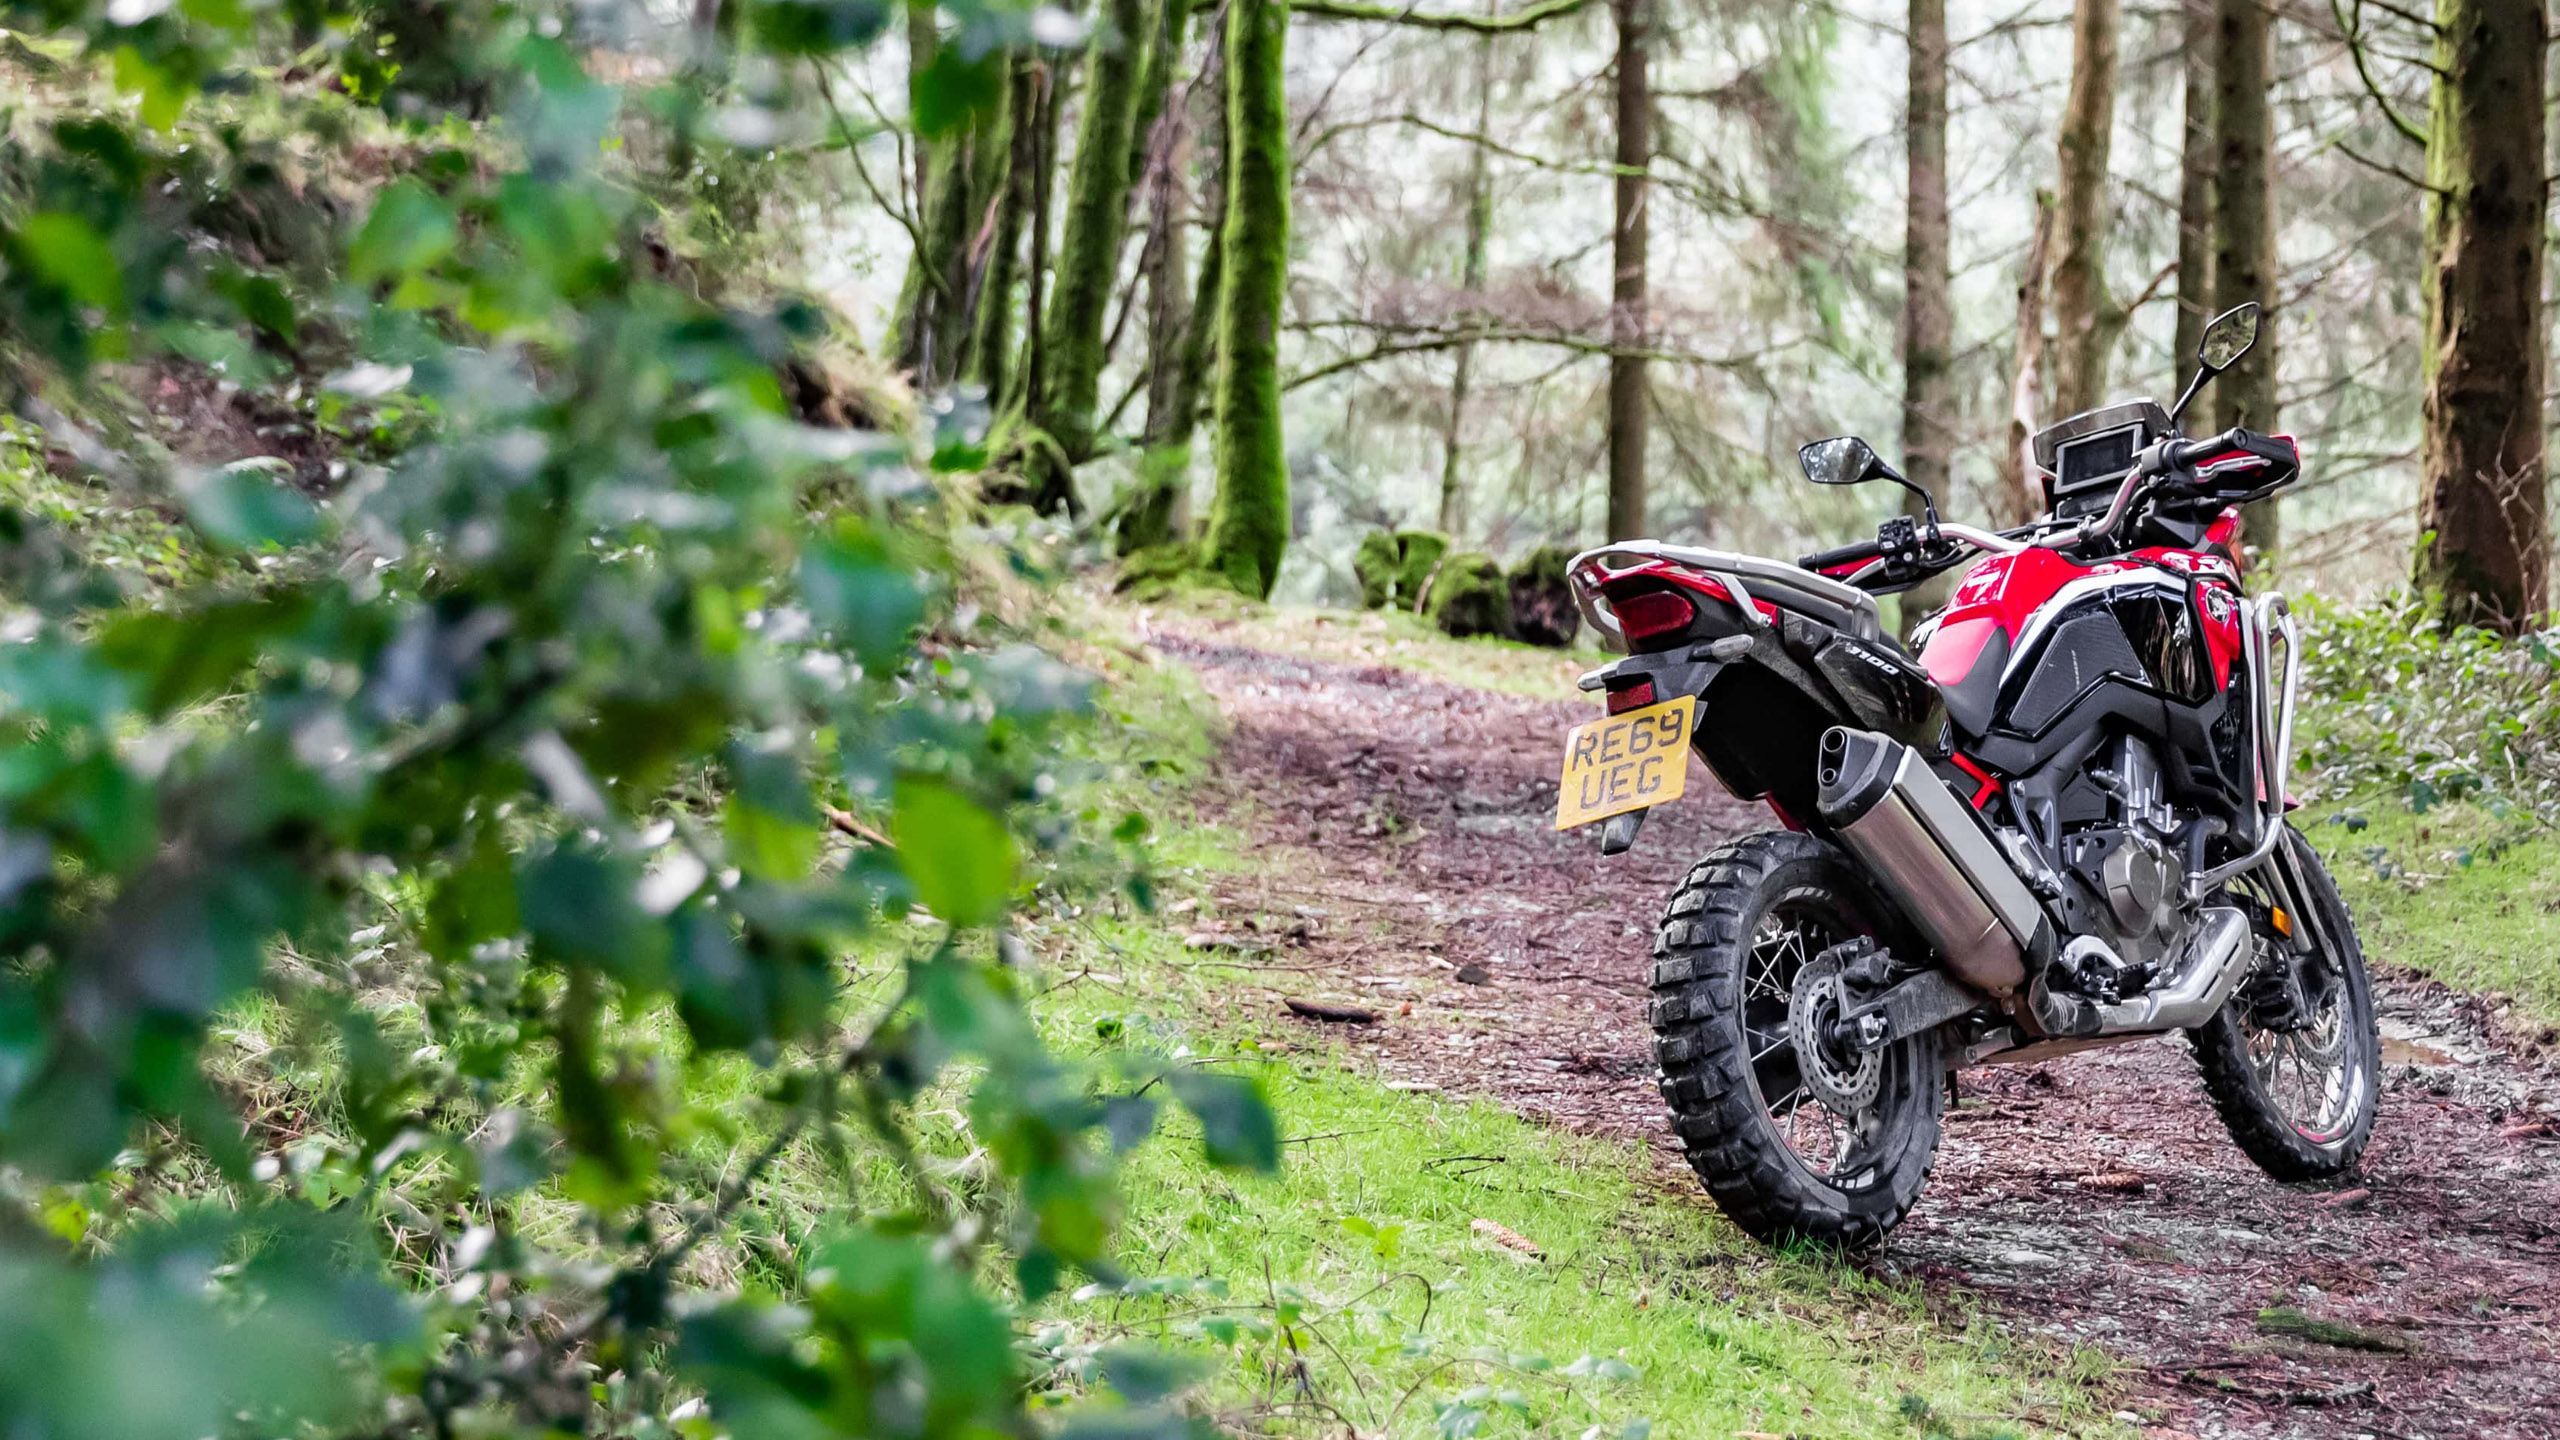 Off-road Honda motorcycle parked in a wooded area.